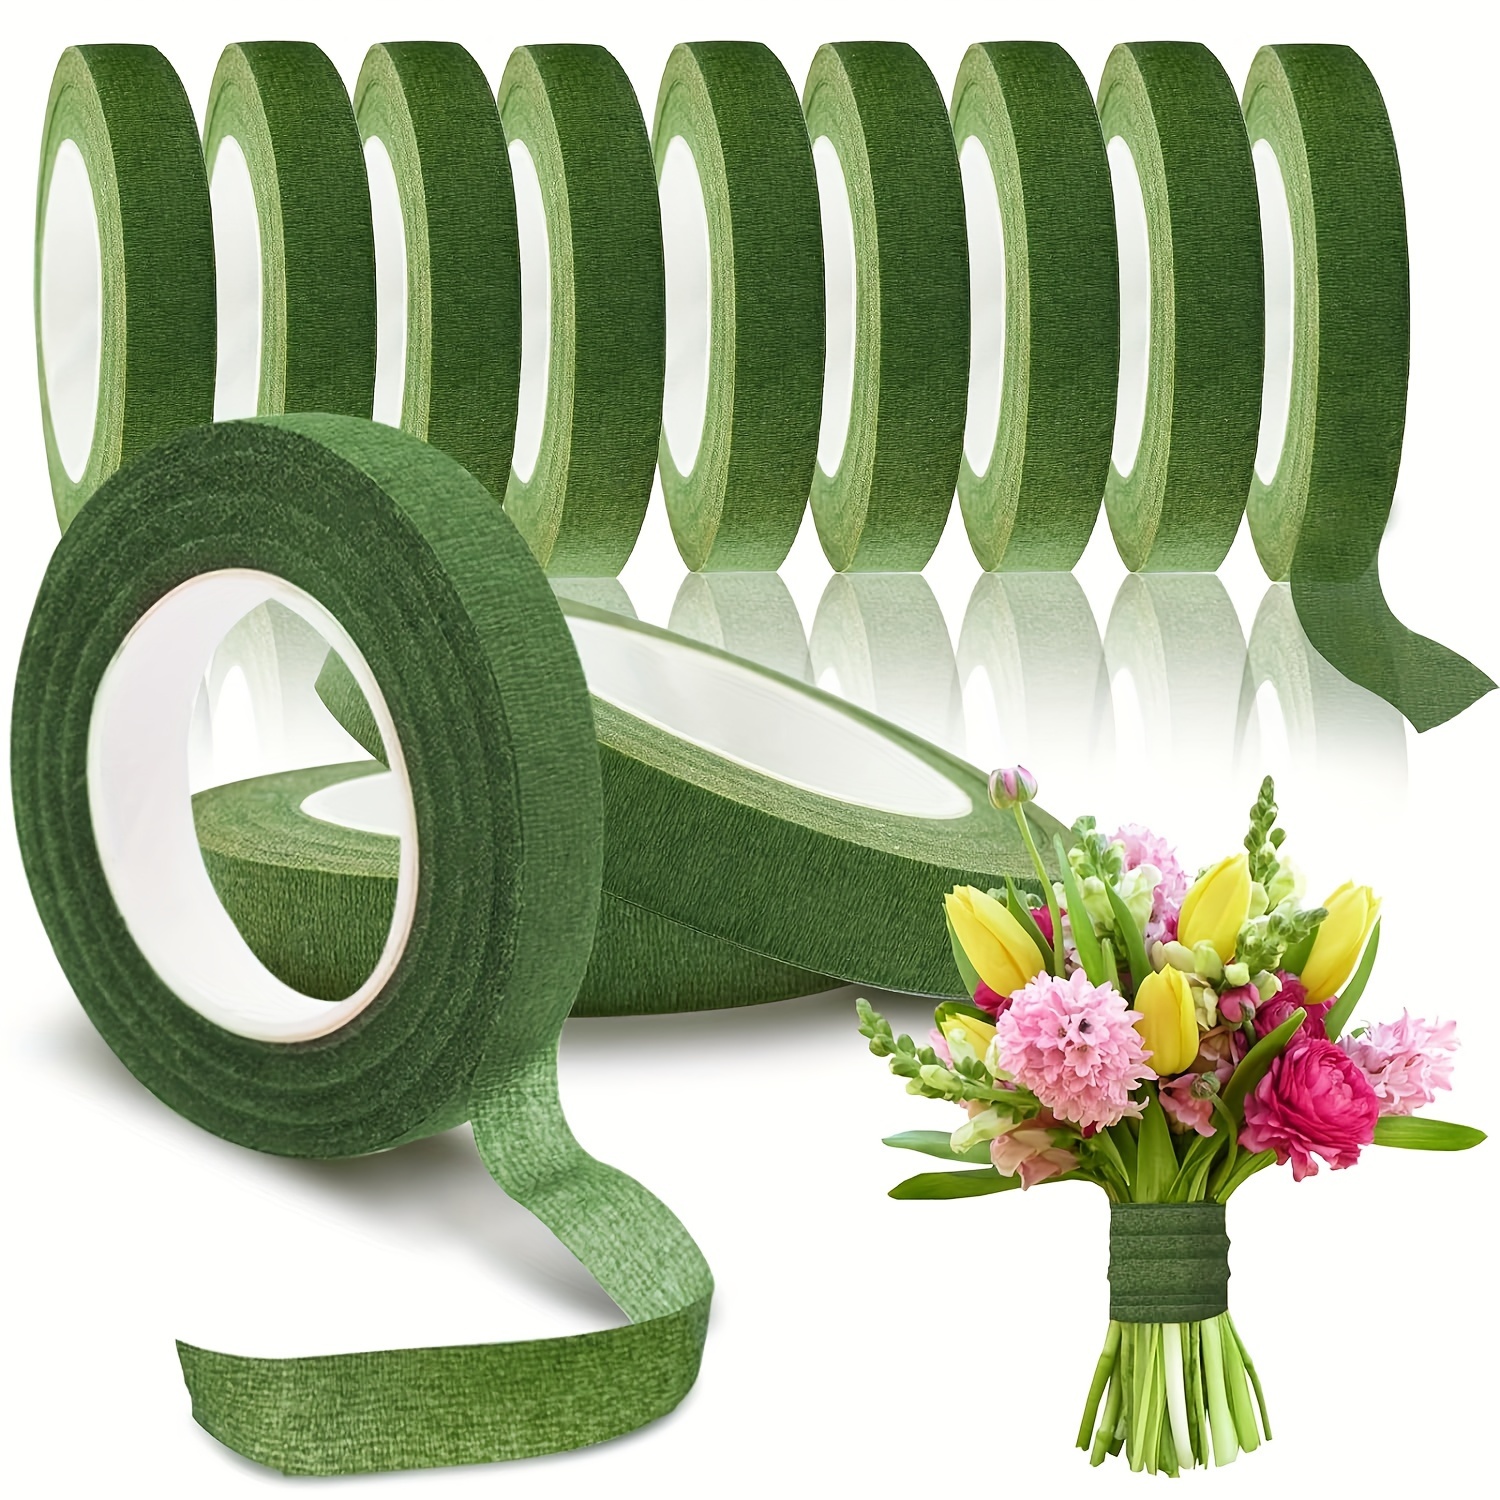 

5 Rolls, 30 Yards Olive Green Floral Packaging Ribbon, Suitable For Diy Wedding Bouquet Packaging, Bouquet Stem Wrapping Decorative Ribbon